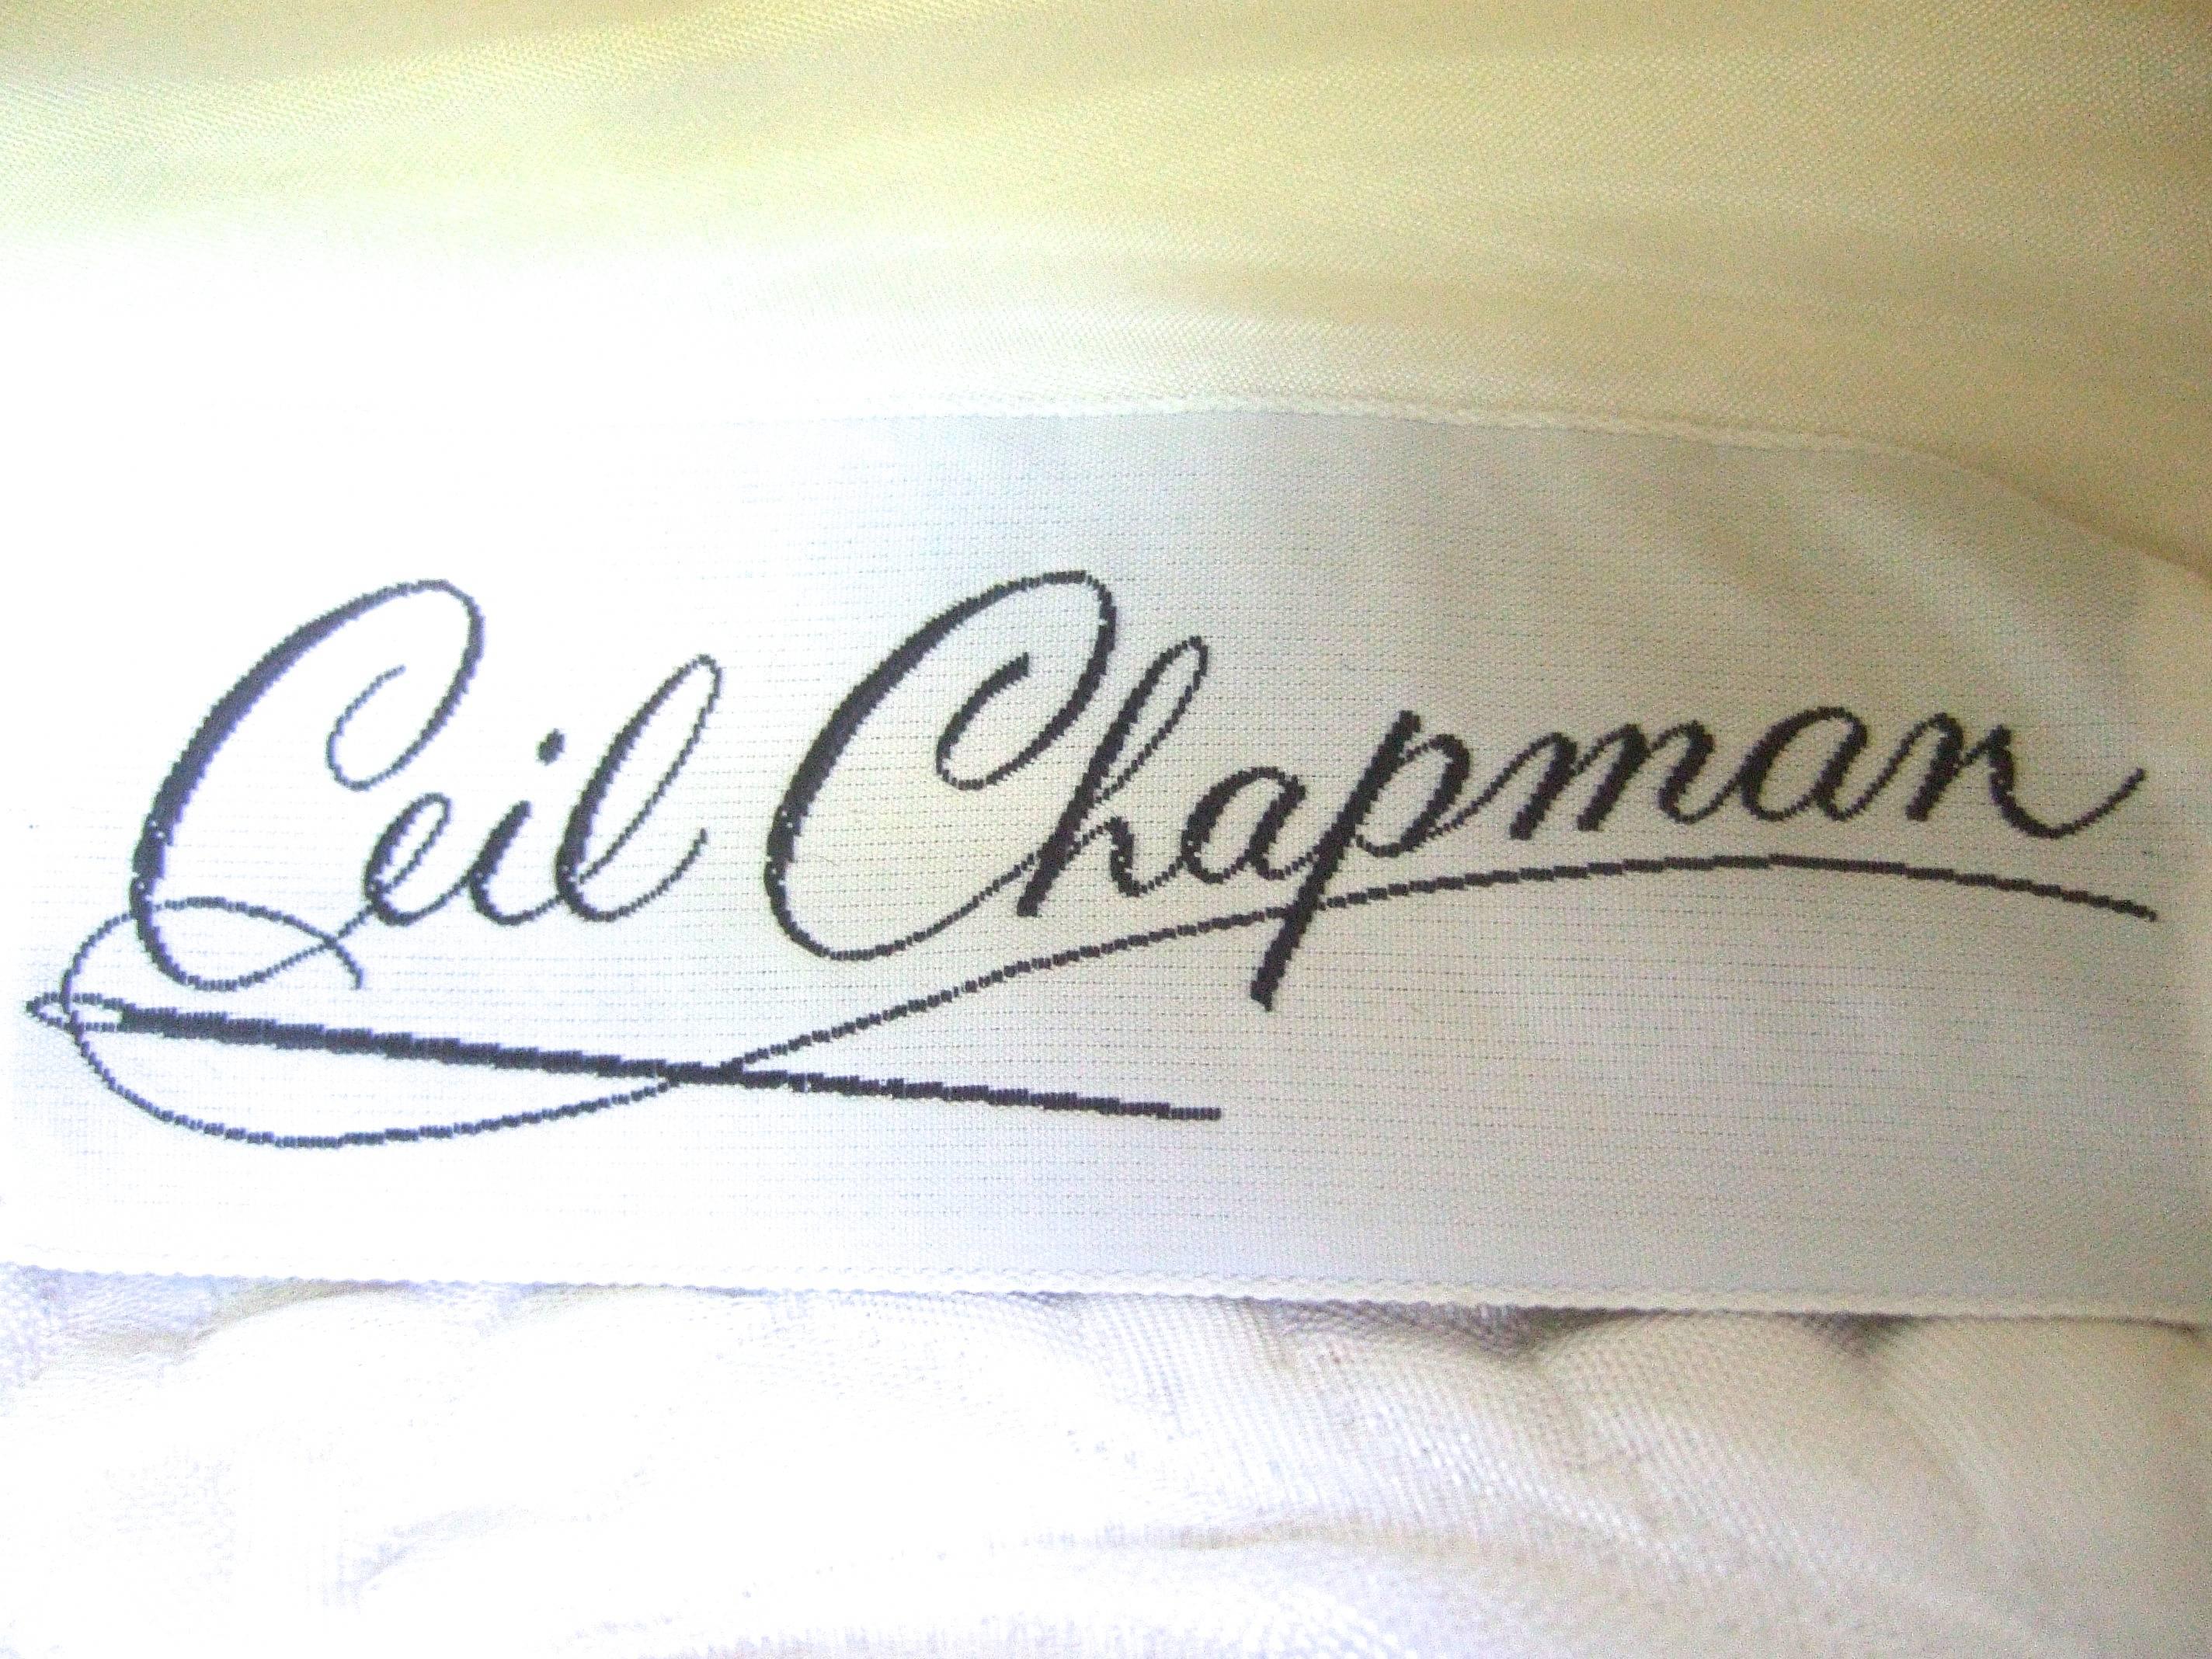 Ceil Chapman Stunning Ivory Brocade Jeweled Empire Gown c 1960 For Sale 5